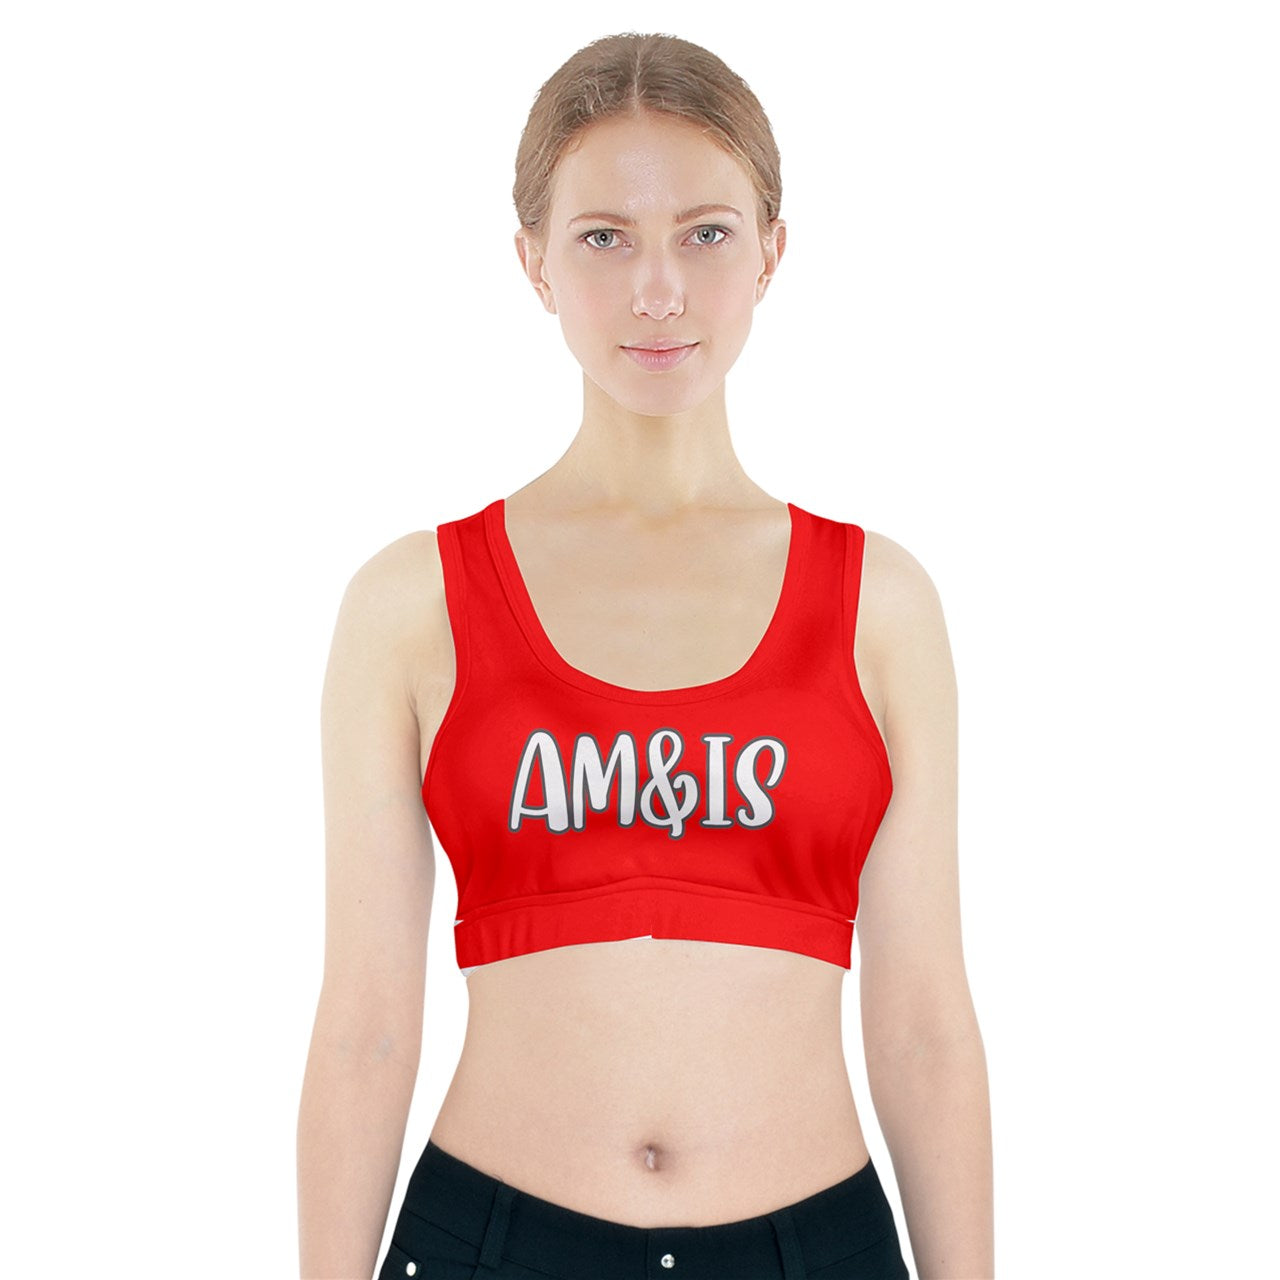 Am&Is Activewear Sports Bra With Pocket - 6 colors - women's sports bra at TFC&H Co.